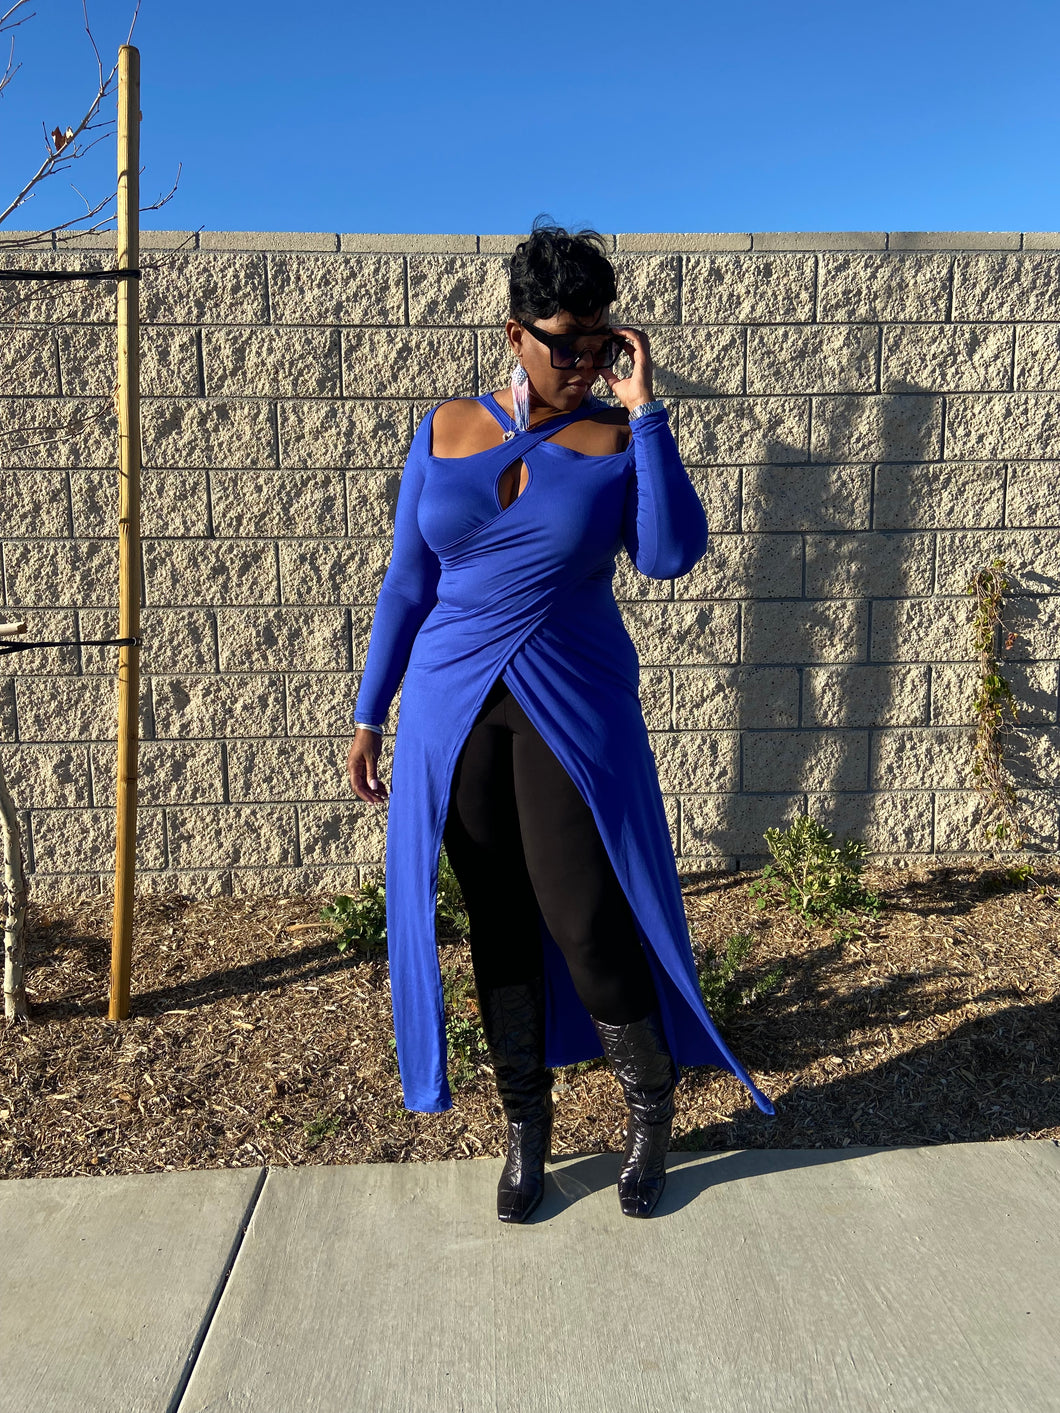 Sale Item!!! Sexy Blue Long Sleeve Maxi Top with Cut Outs.